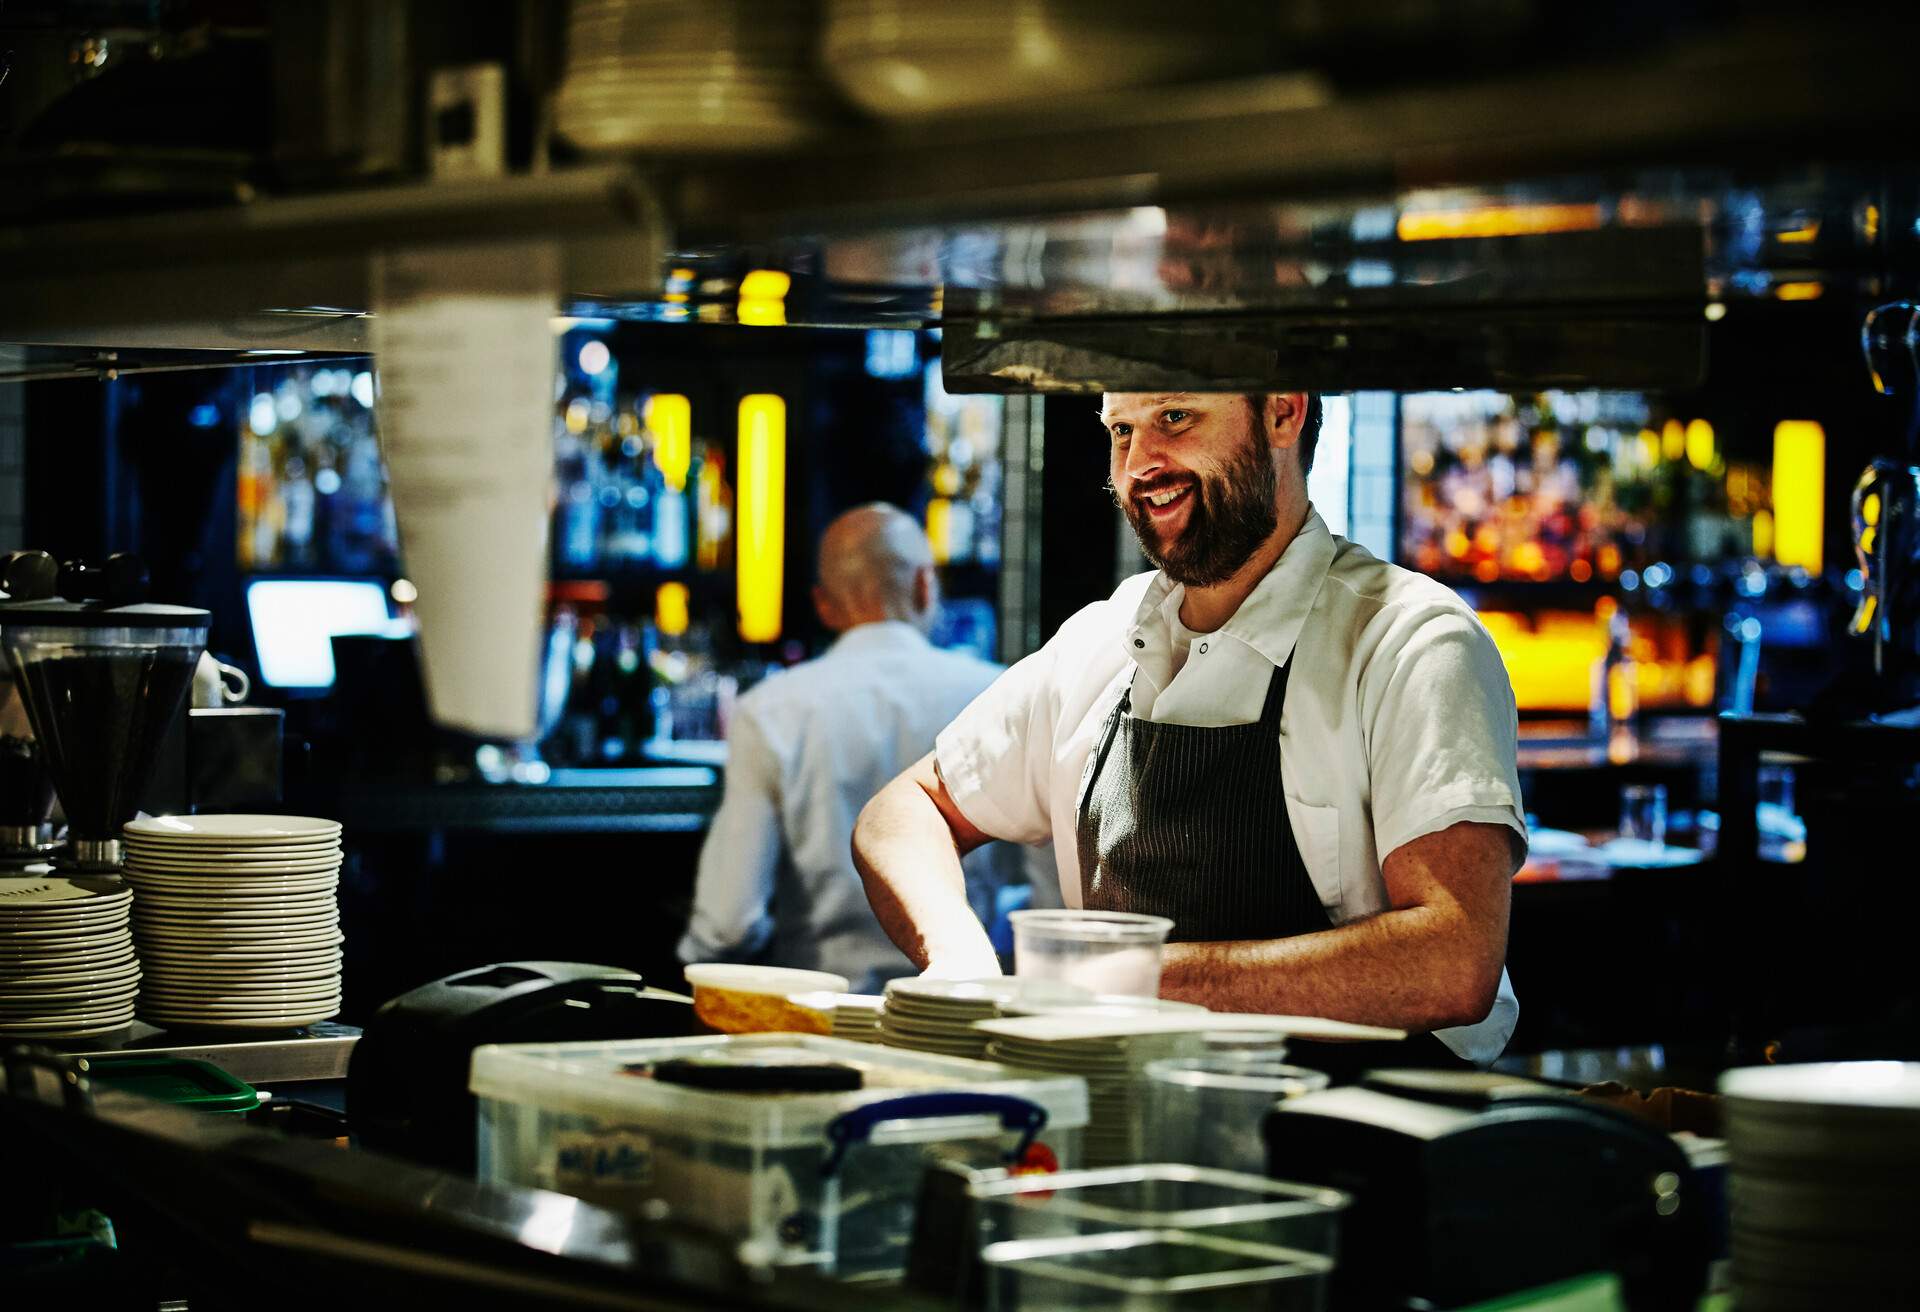 A chef smiling as he works behind a counter lined with stacks of dishes in the kitchen.